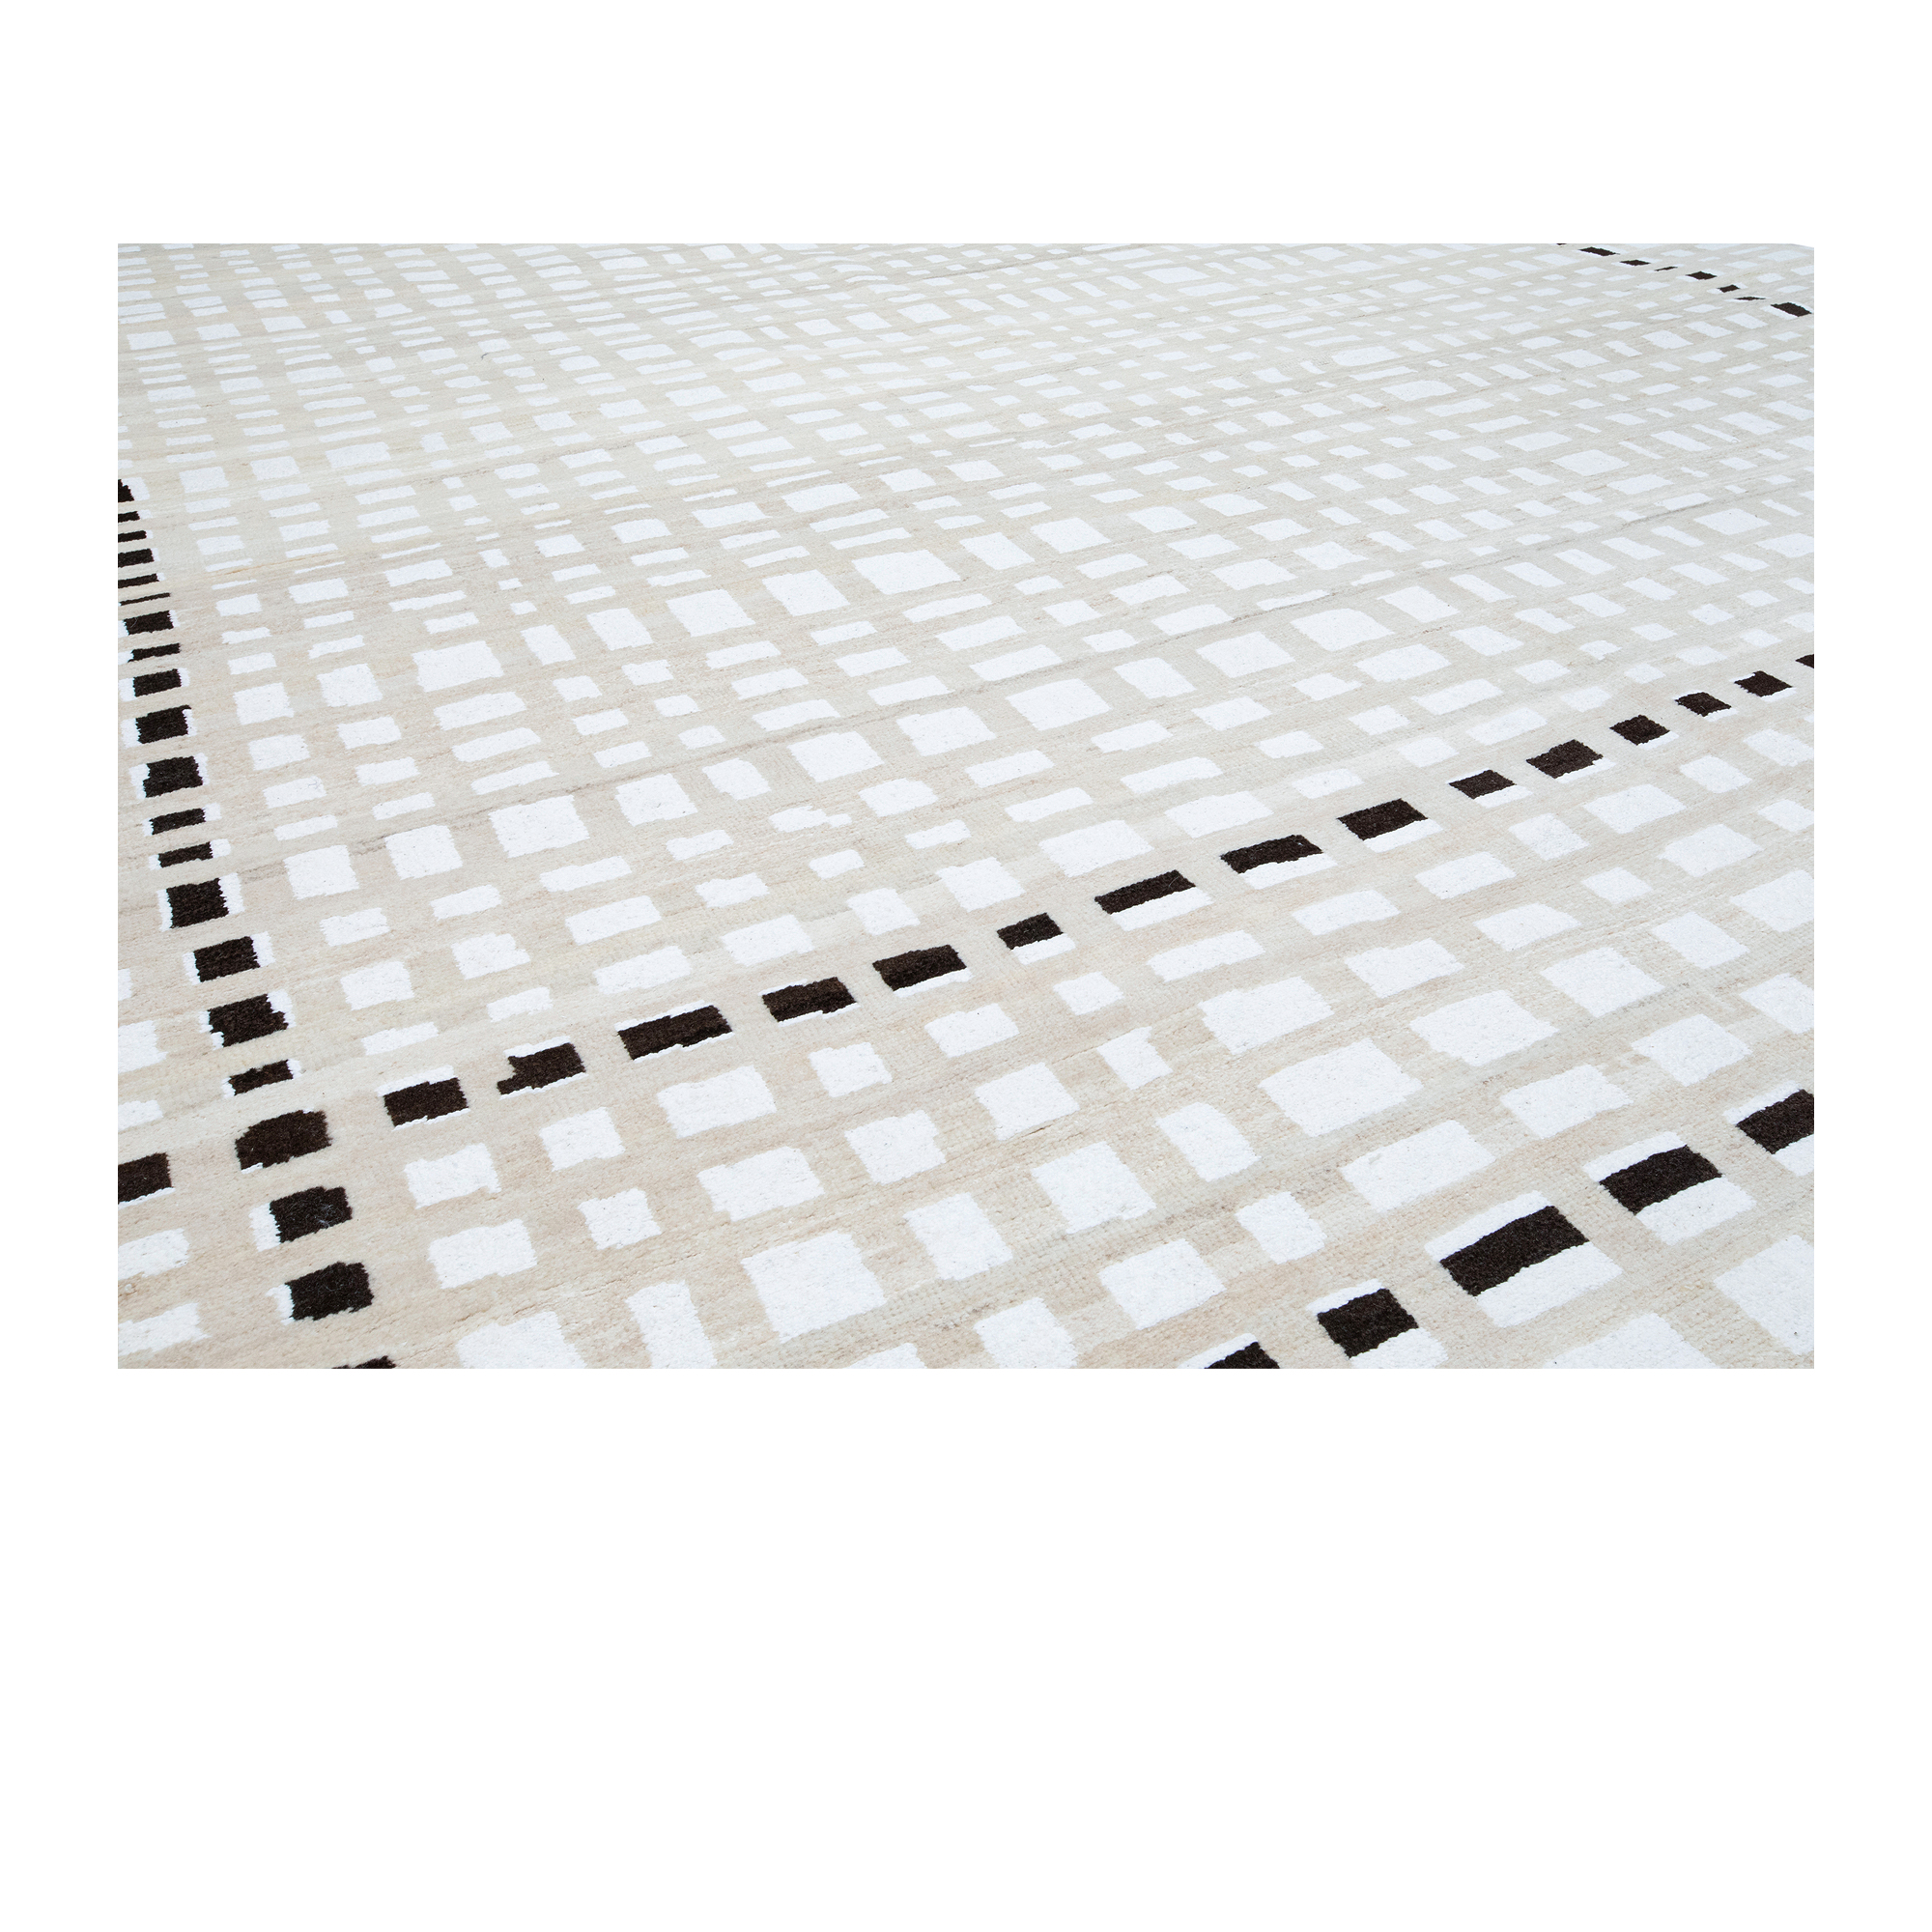 Morno rug is a hand-knotted modern piece made from naturally dyed wool and cotton accents. 